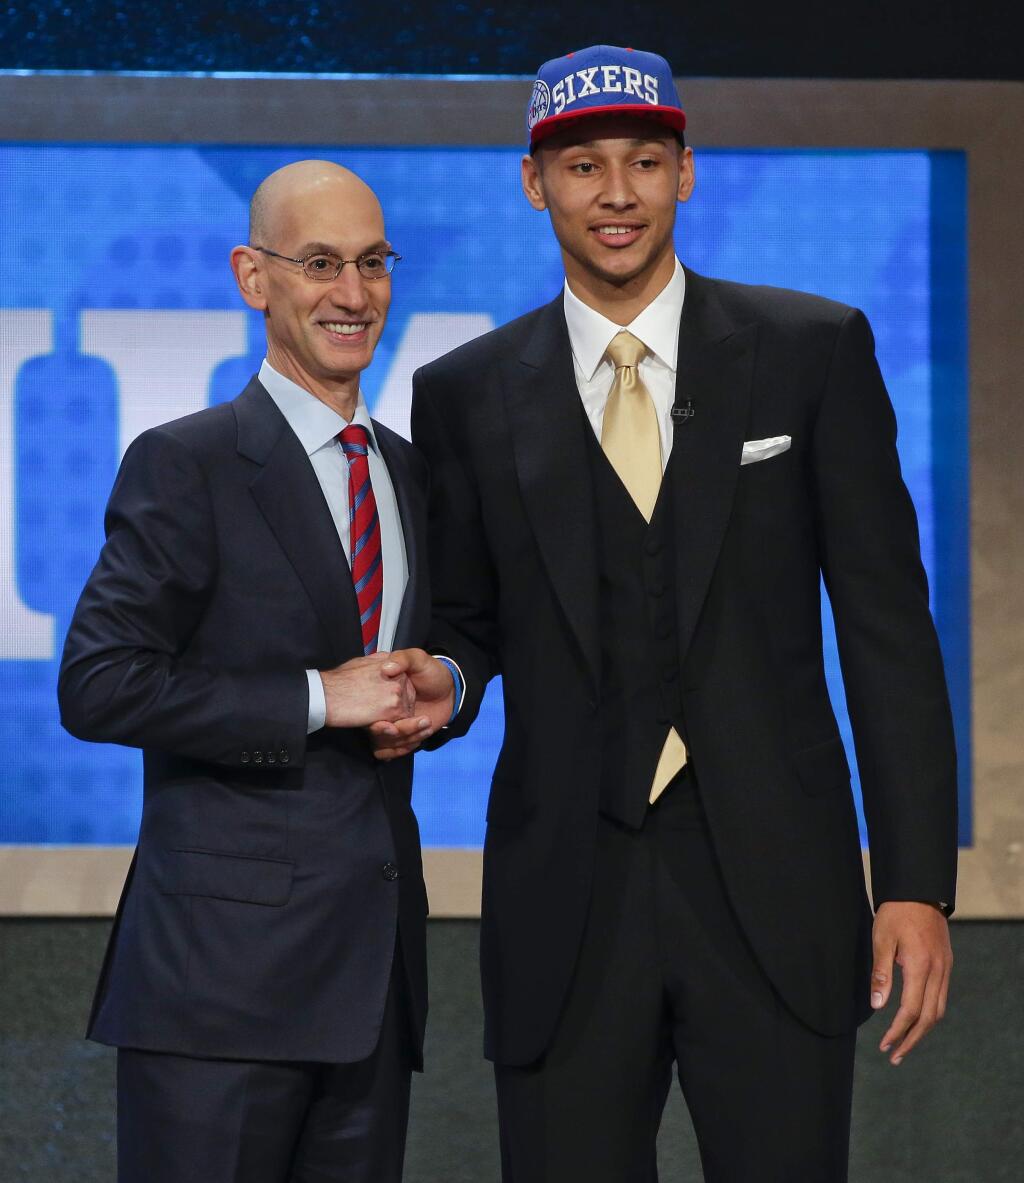 LSU's Ben Simmons poses for a photo with NBA Commissioner Adam Silver after being selected as the top pick by the Philadelphia 76ers during the NBA draft, Thursday, June 23, 2016, in New York. (AP Photo/Frank Franklin II)